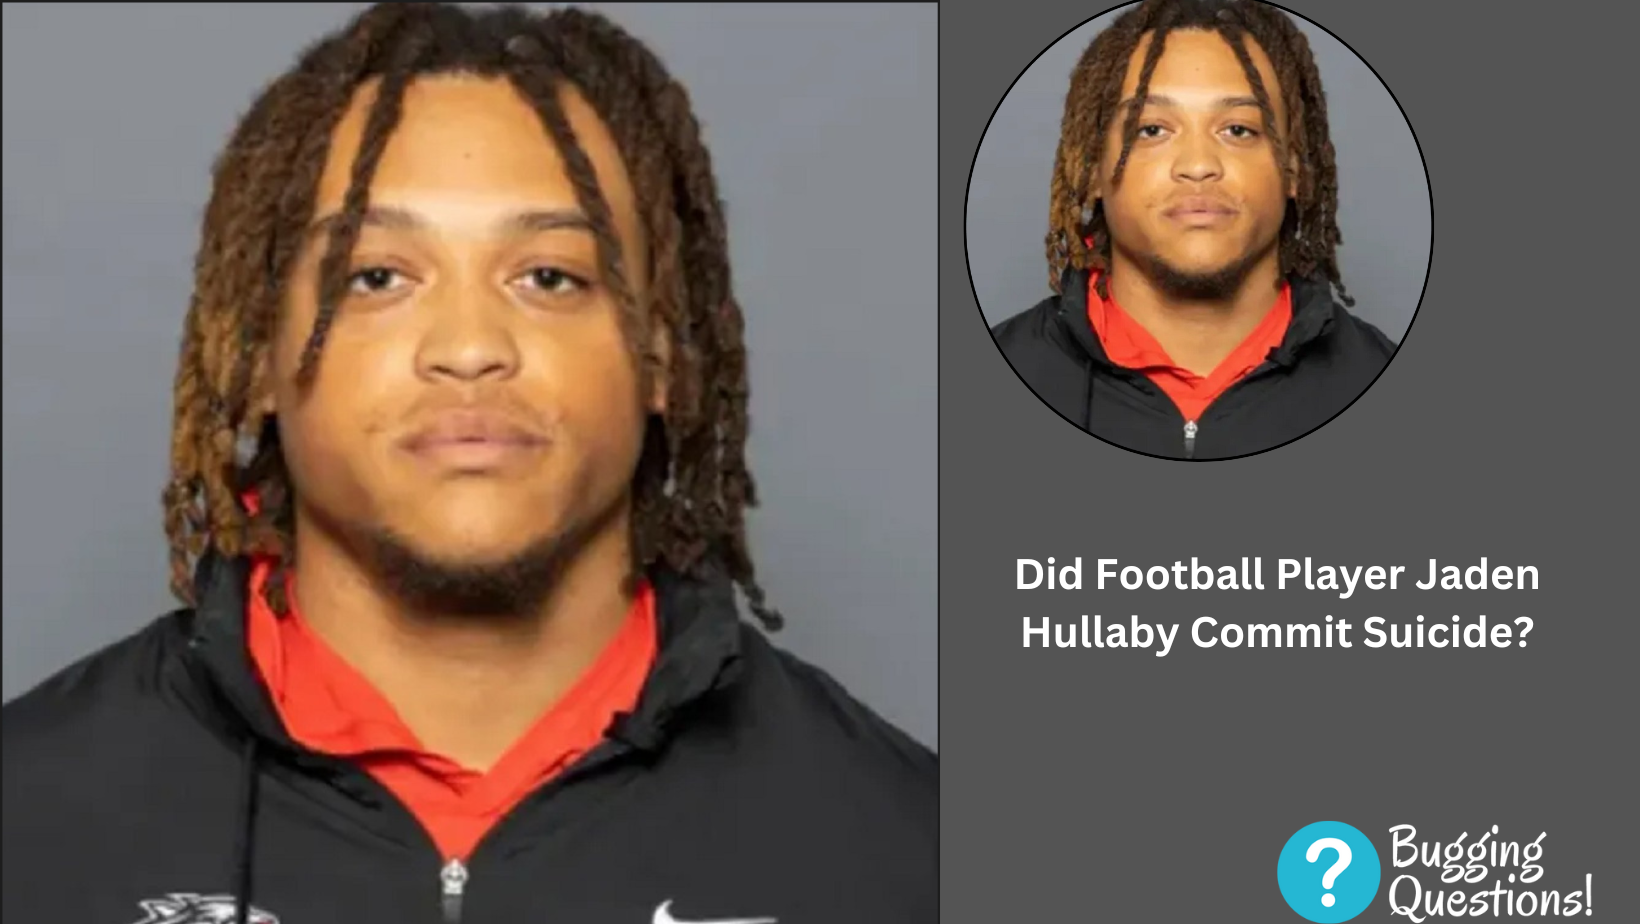 Did Football Player Jaden Hullaby Commit Suicide?